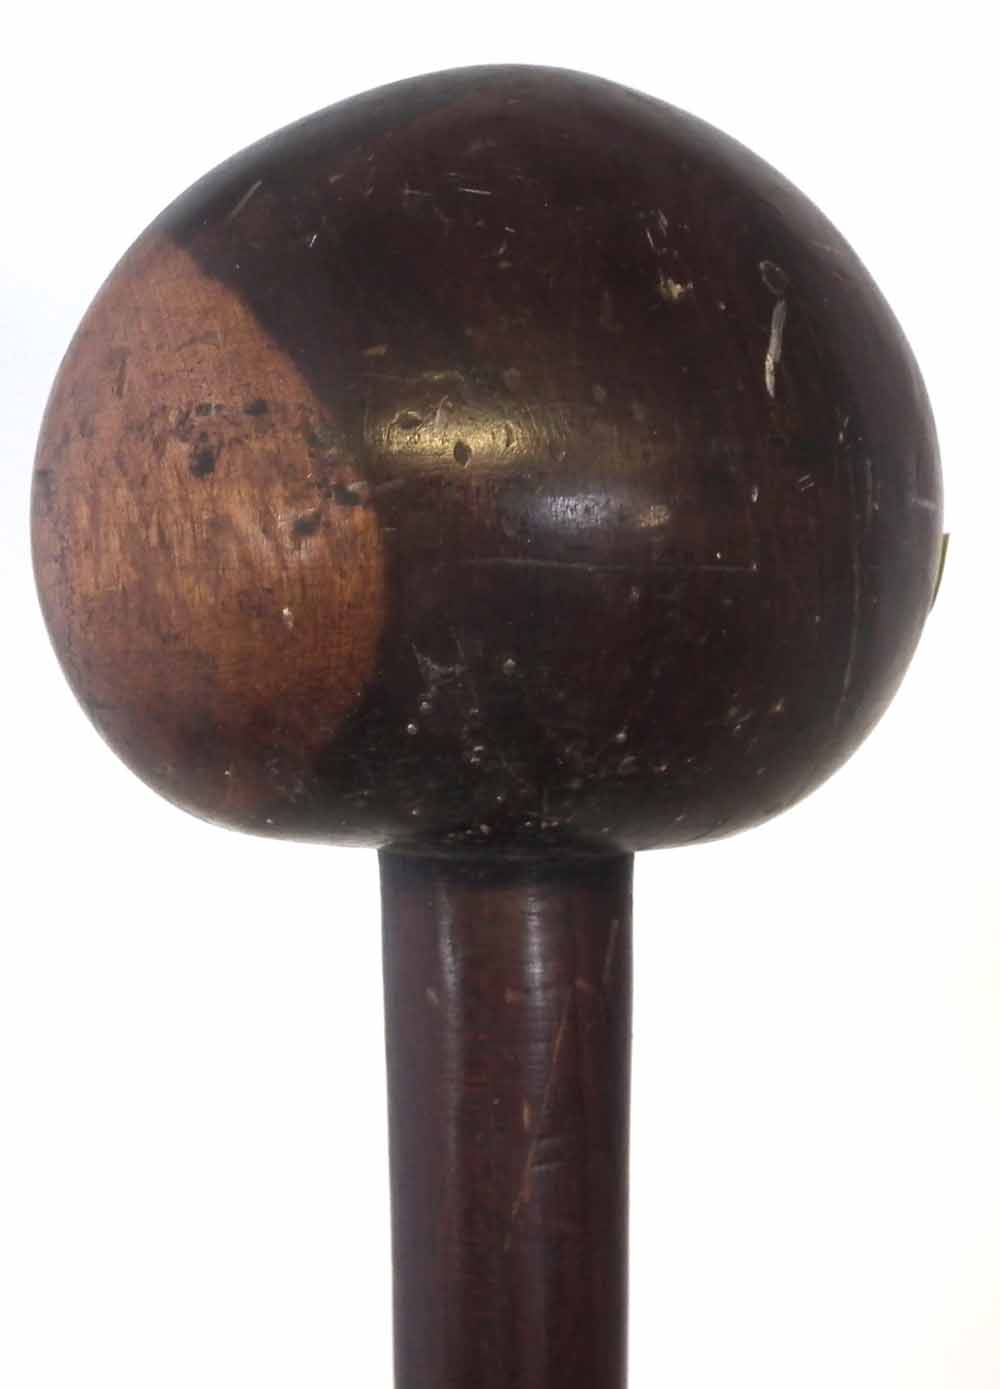 South African Zulu knobkerrie, 58cm long - Image 3 of 6